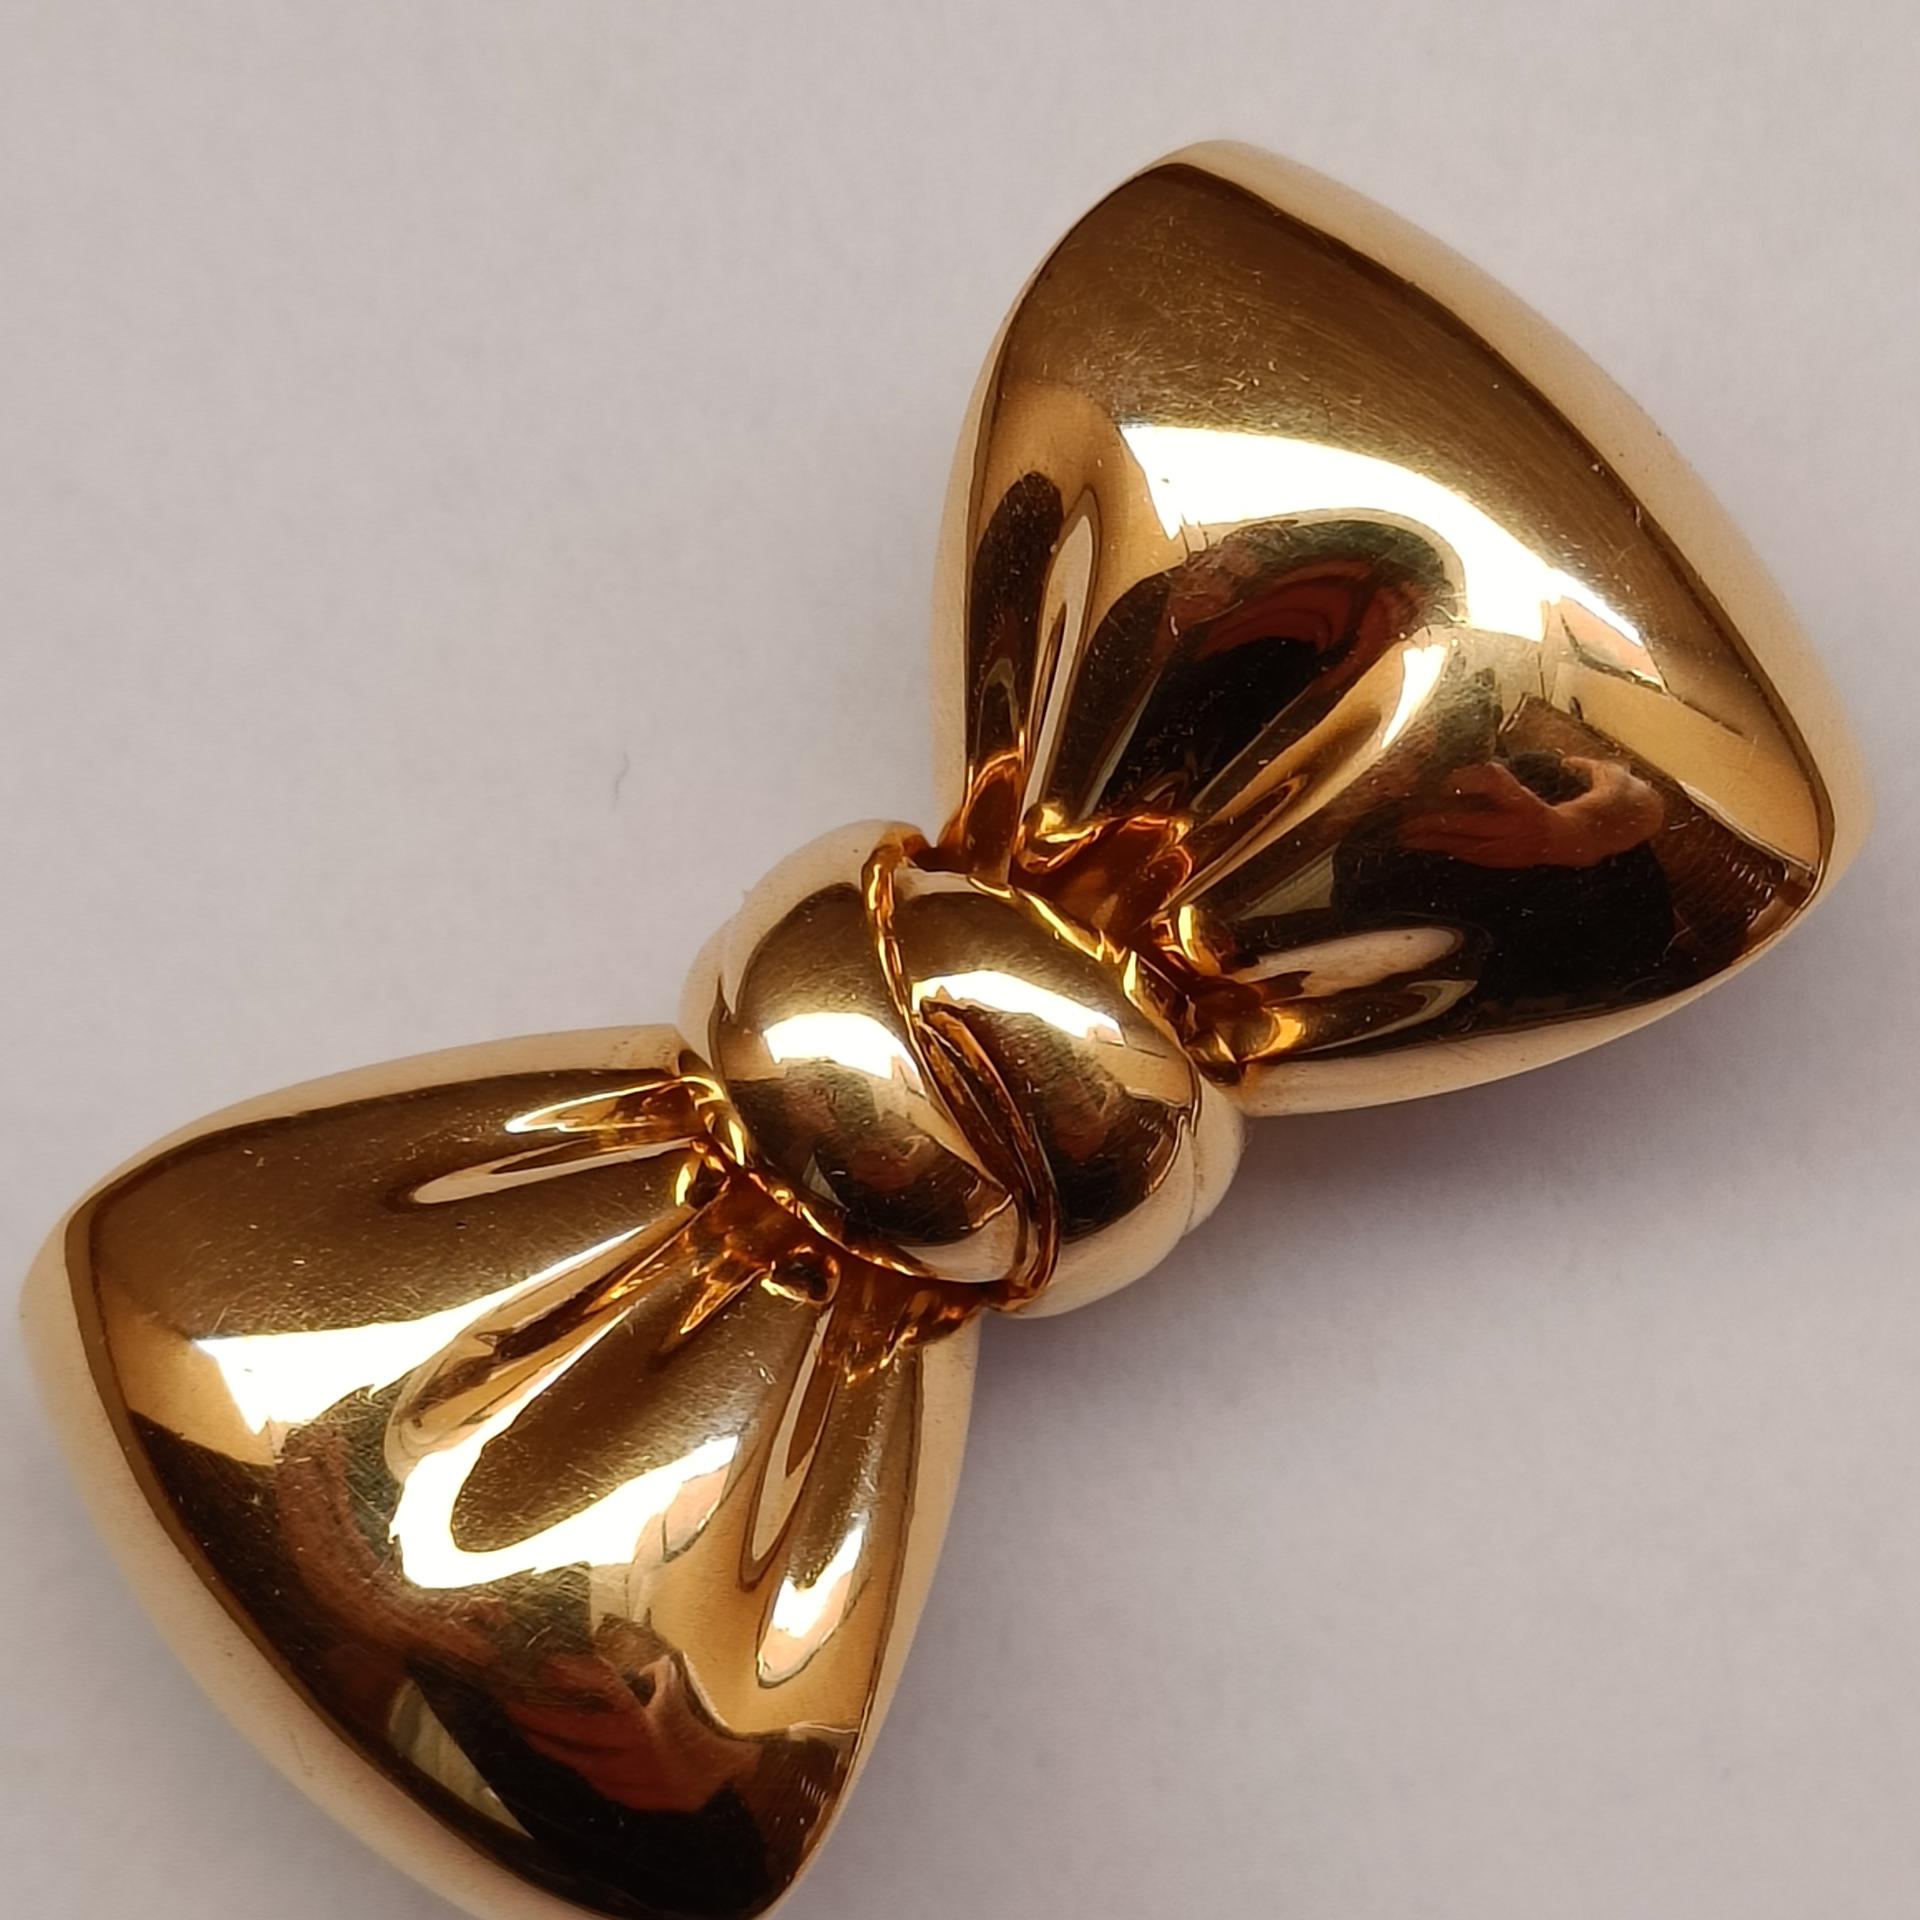 Van Cleef & Arpels, a bold and chunky clip brooch designed as a bow crafted in 18k yellow gold.

Stamped VCA 750 and serial number.
Good condition, no defects.

Dimensions: 4 x 2 cm (approx.)
Weight 26.40 grams

Original pouch included, signed Van